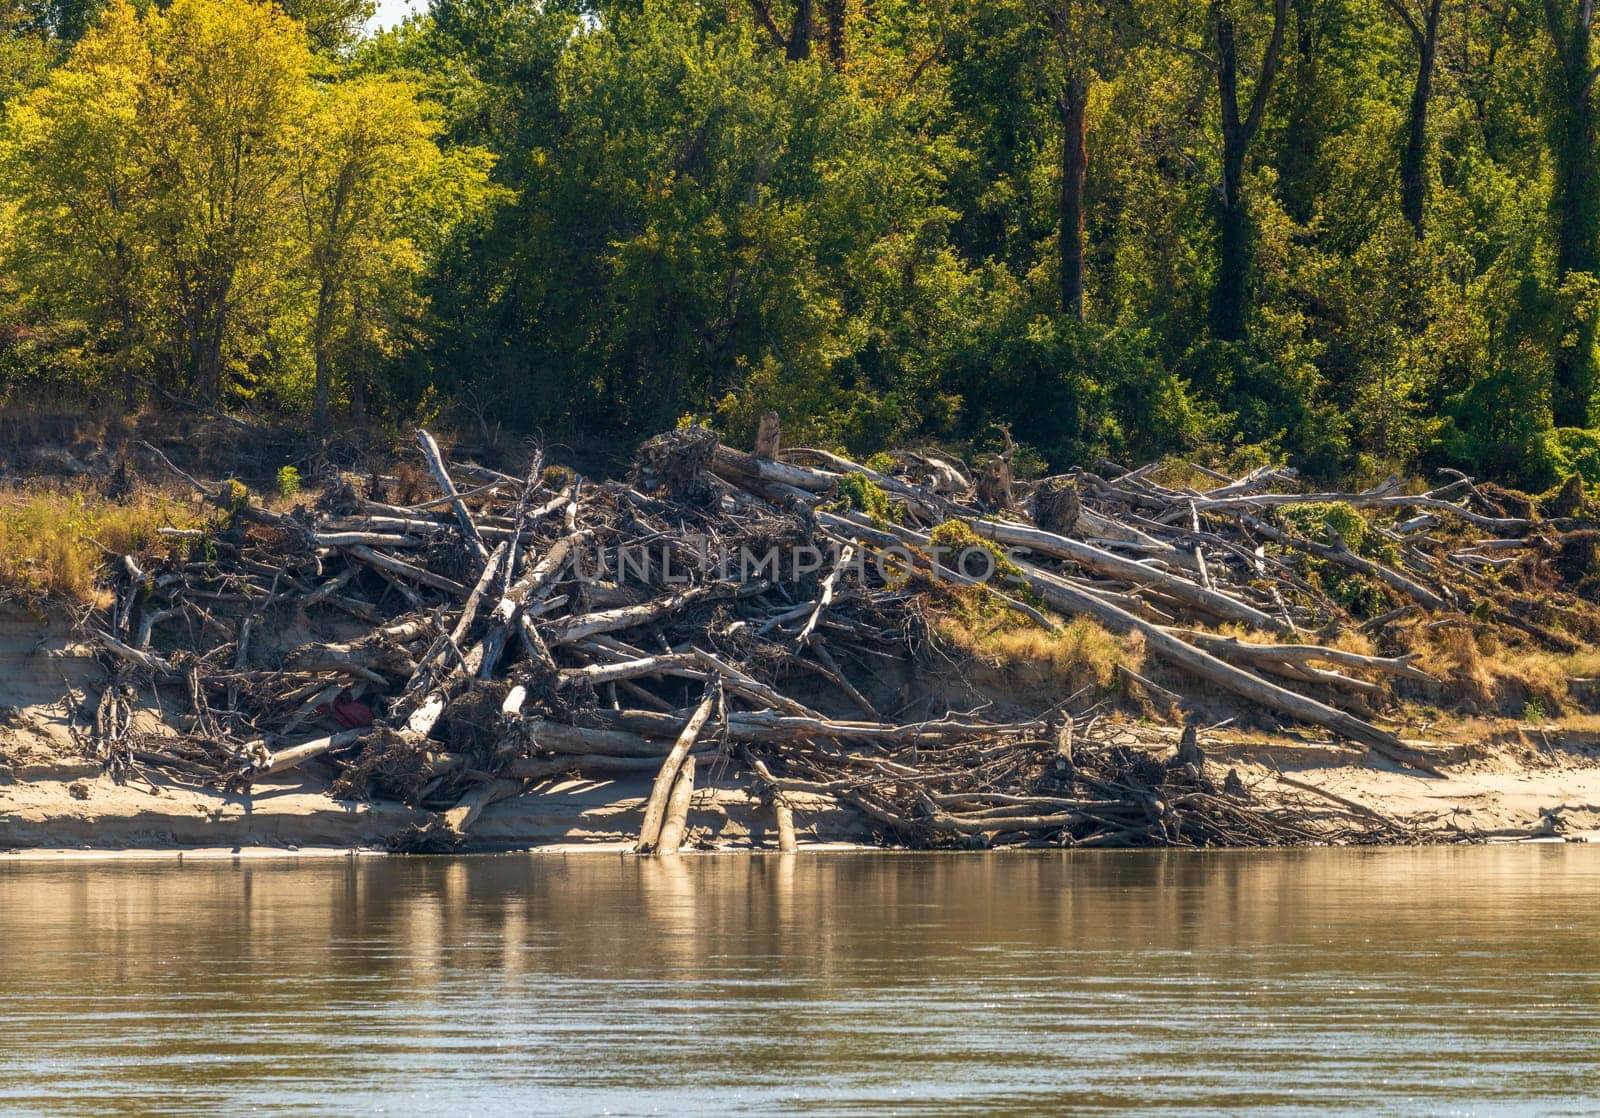 Low water levels in the lower Mississippi river expose sand bars and piles of beached tree trunks on narrow channel in the river